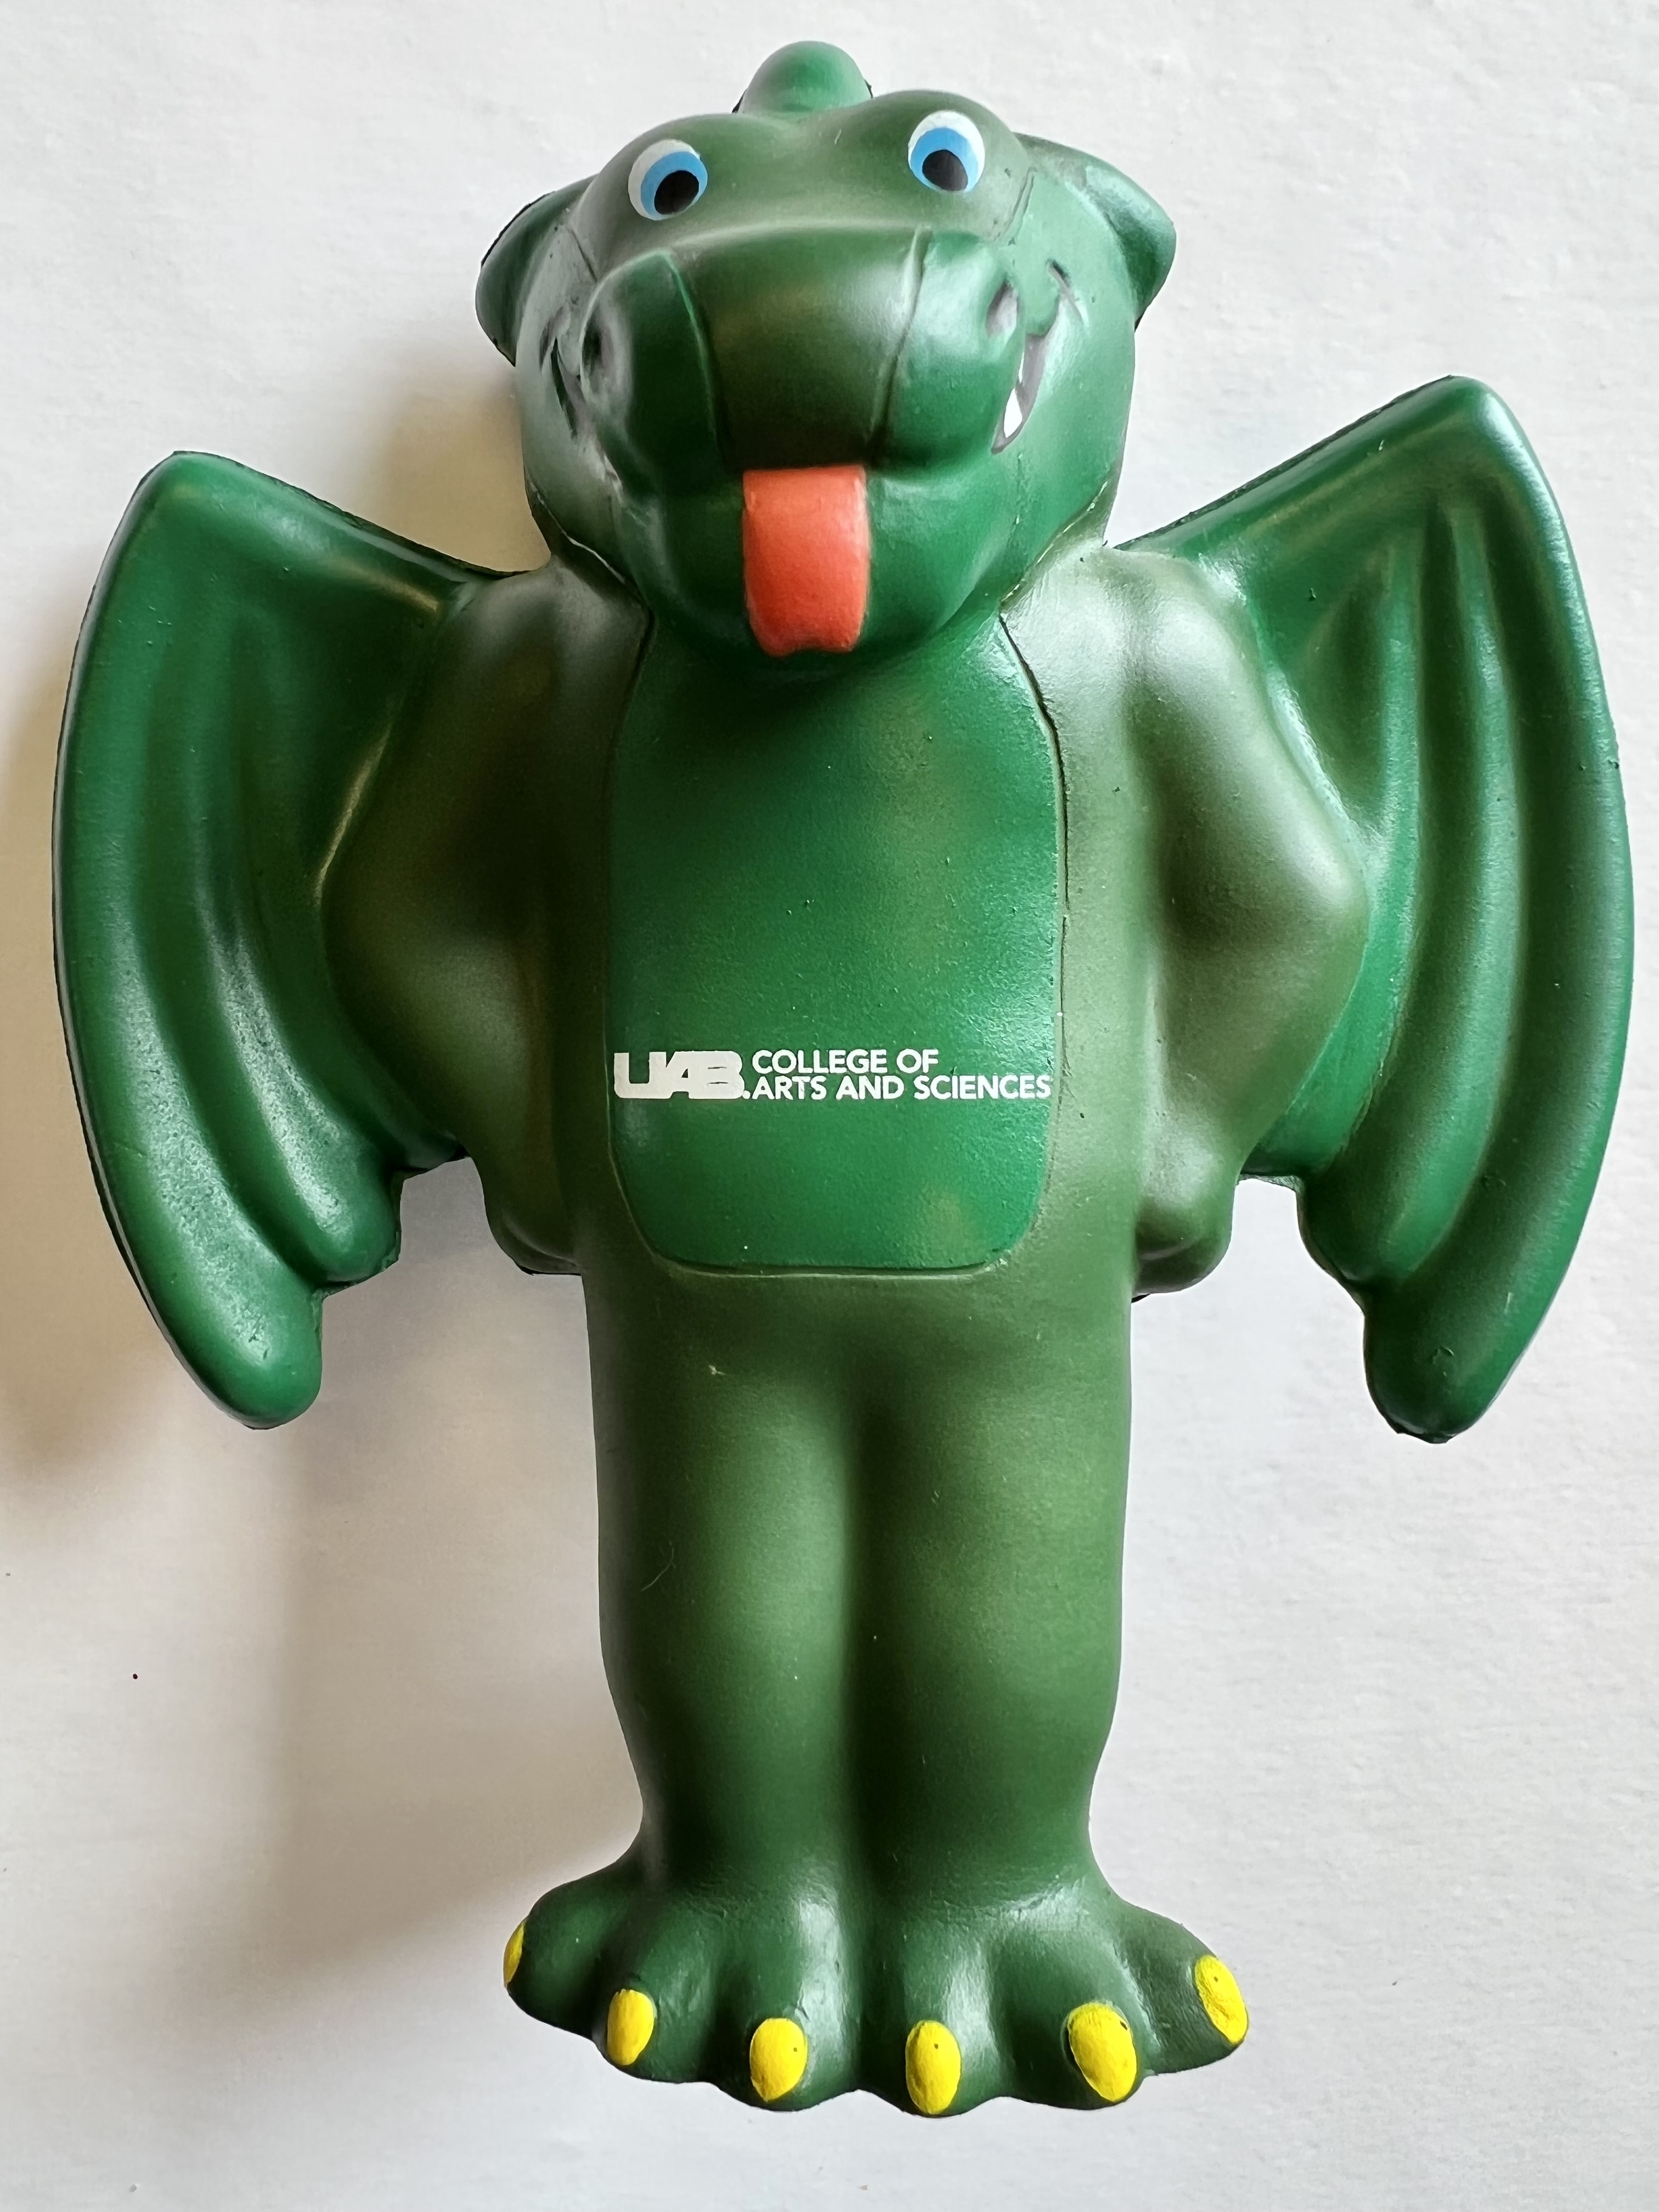 Green vinyl Blaze squeeze toy, with wings and a silly expression.